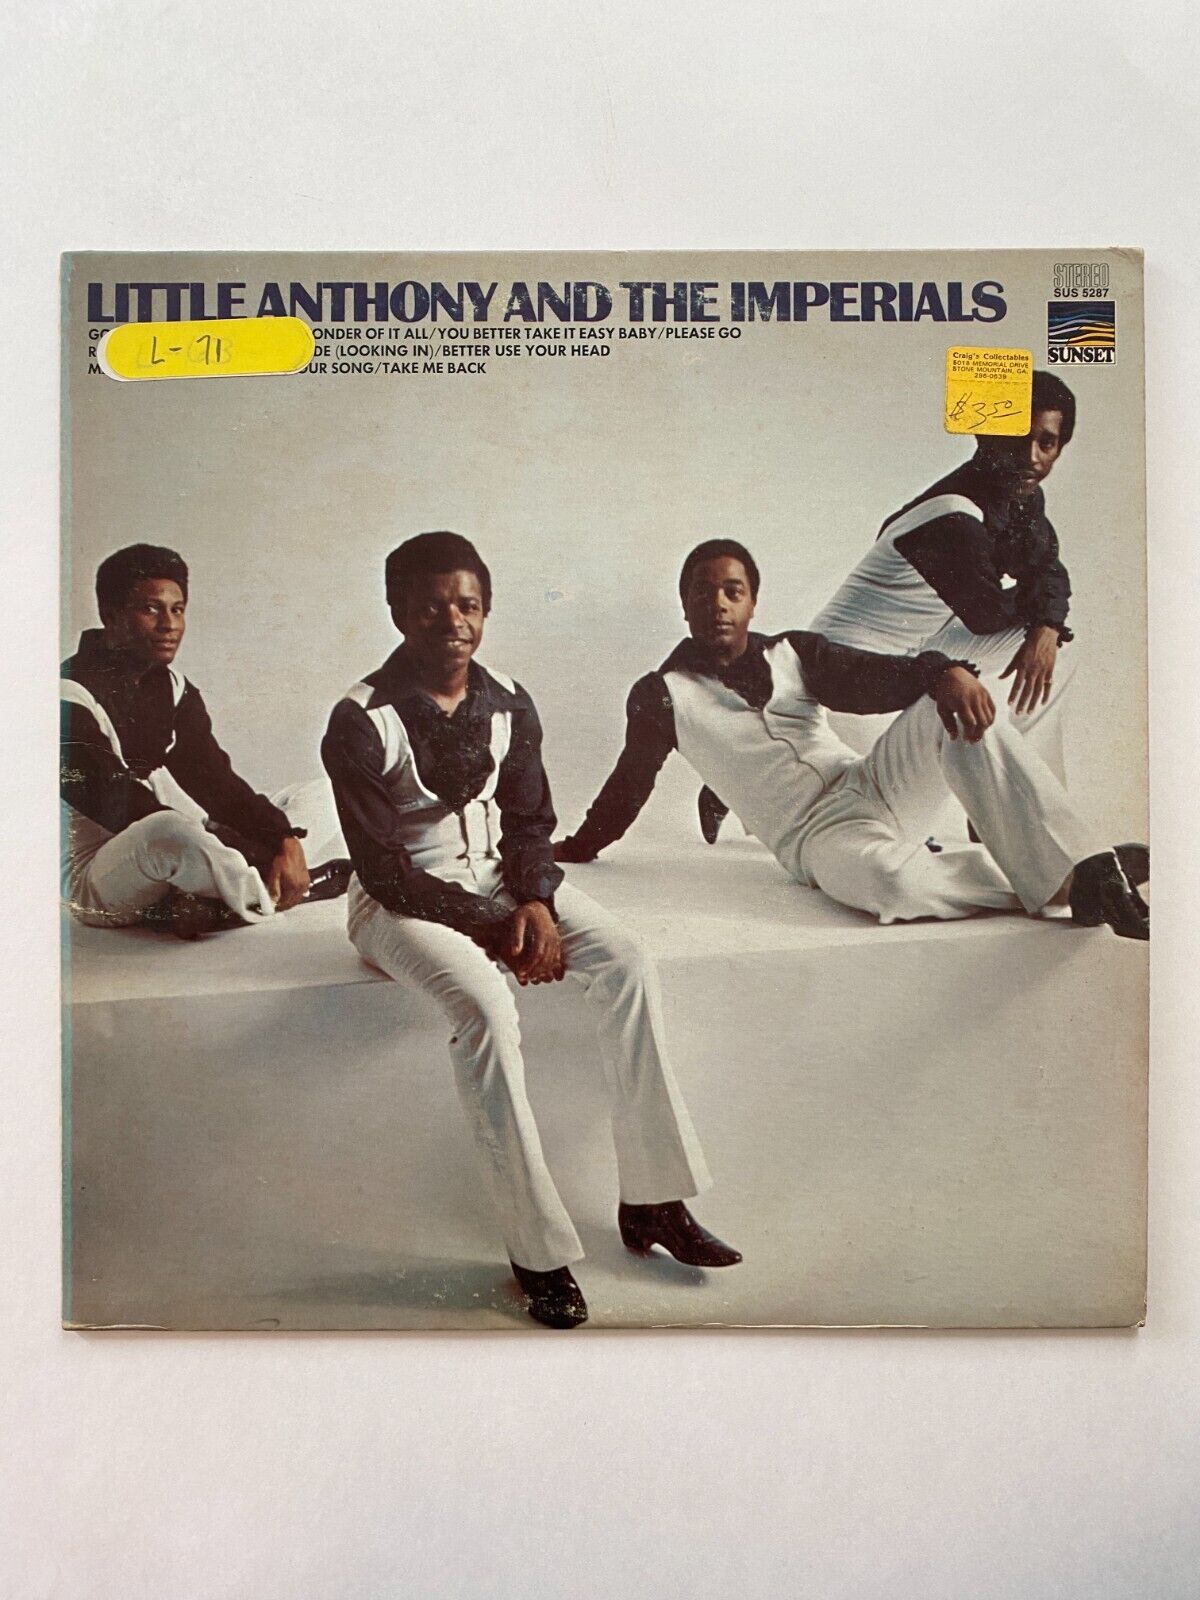 Little Anthony & The Imperials – Little Anthony And The Imperials Vinyl LP Funk